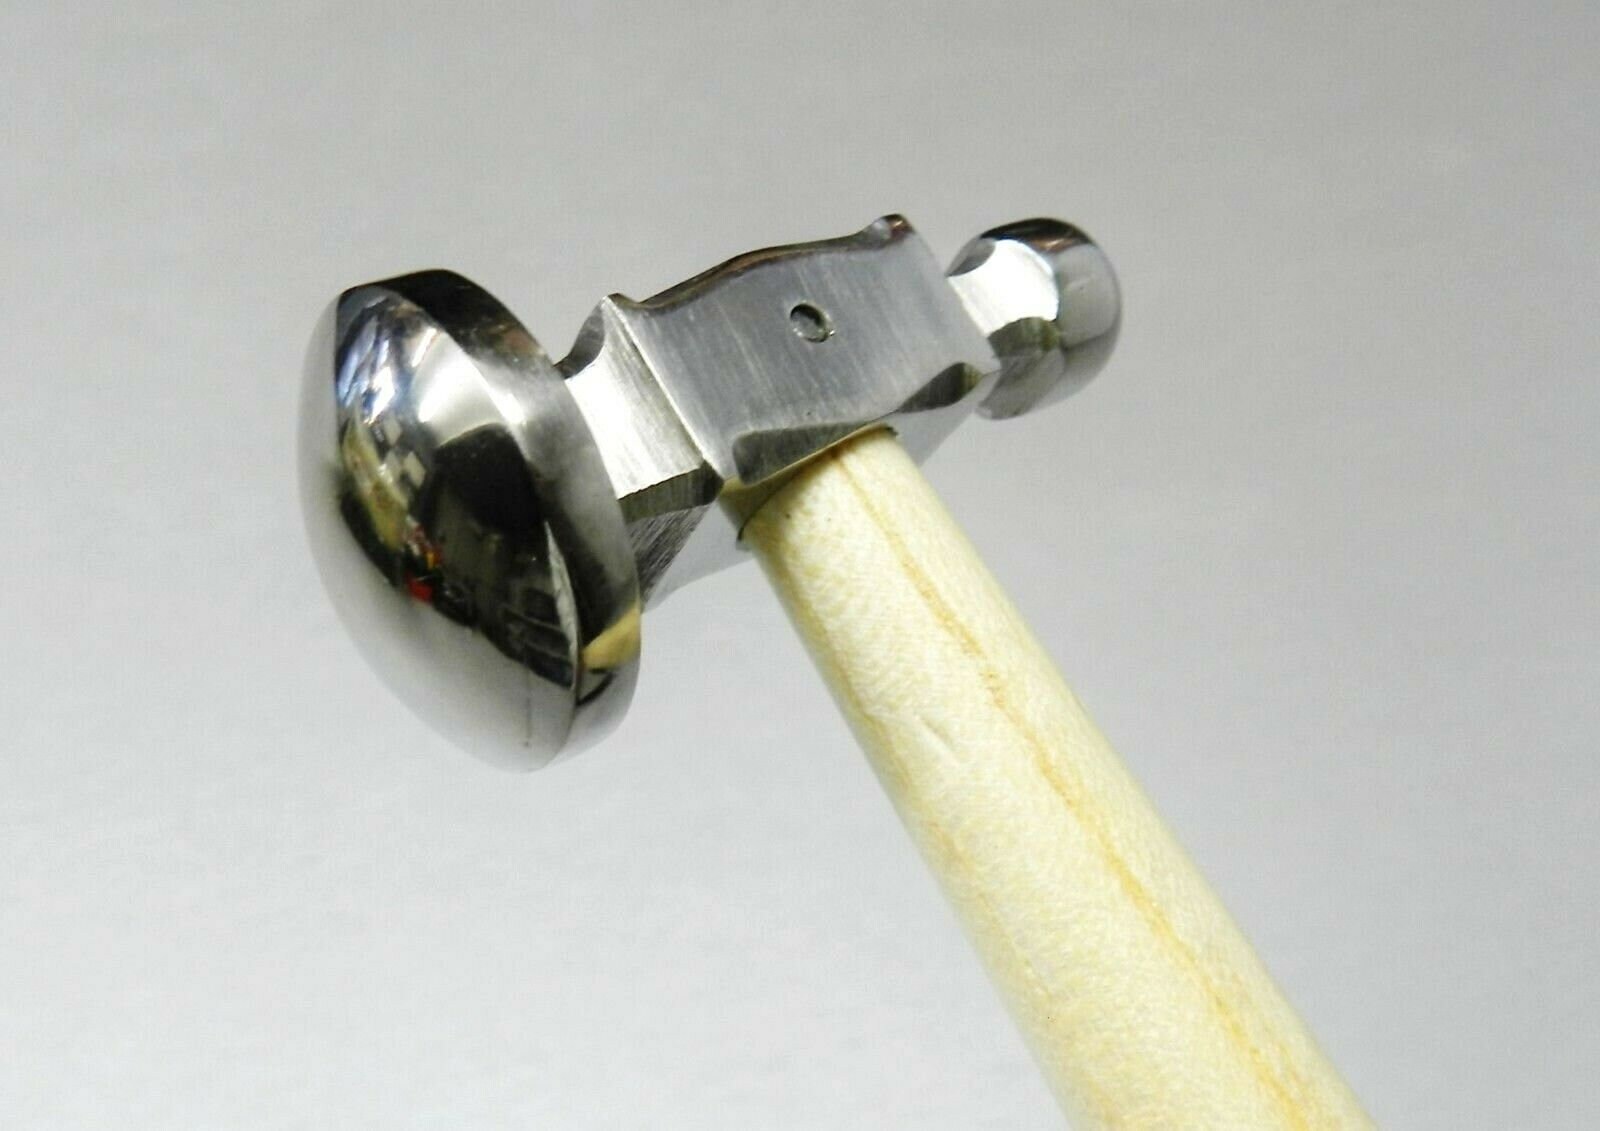 1" 25mm Chasing Hammer Repouse Ball Pein Planishing Metal Jewellers Tool M0264